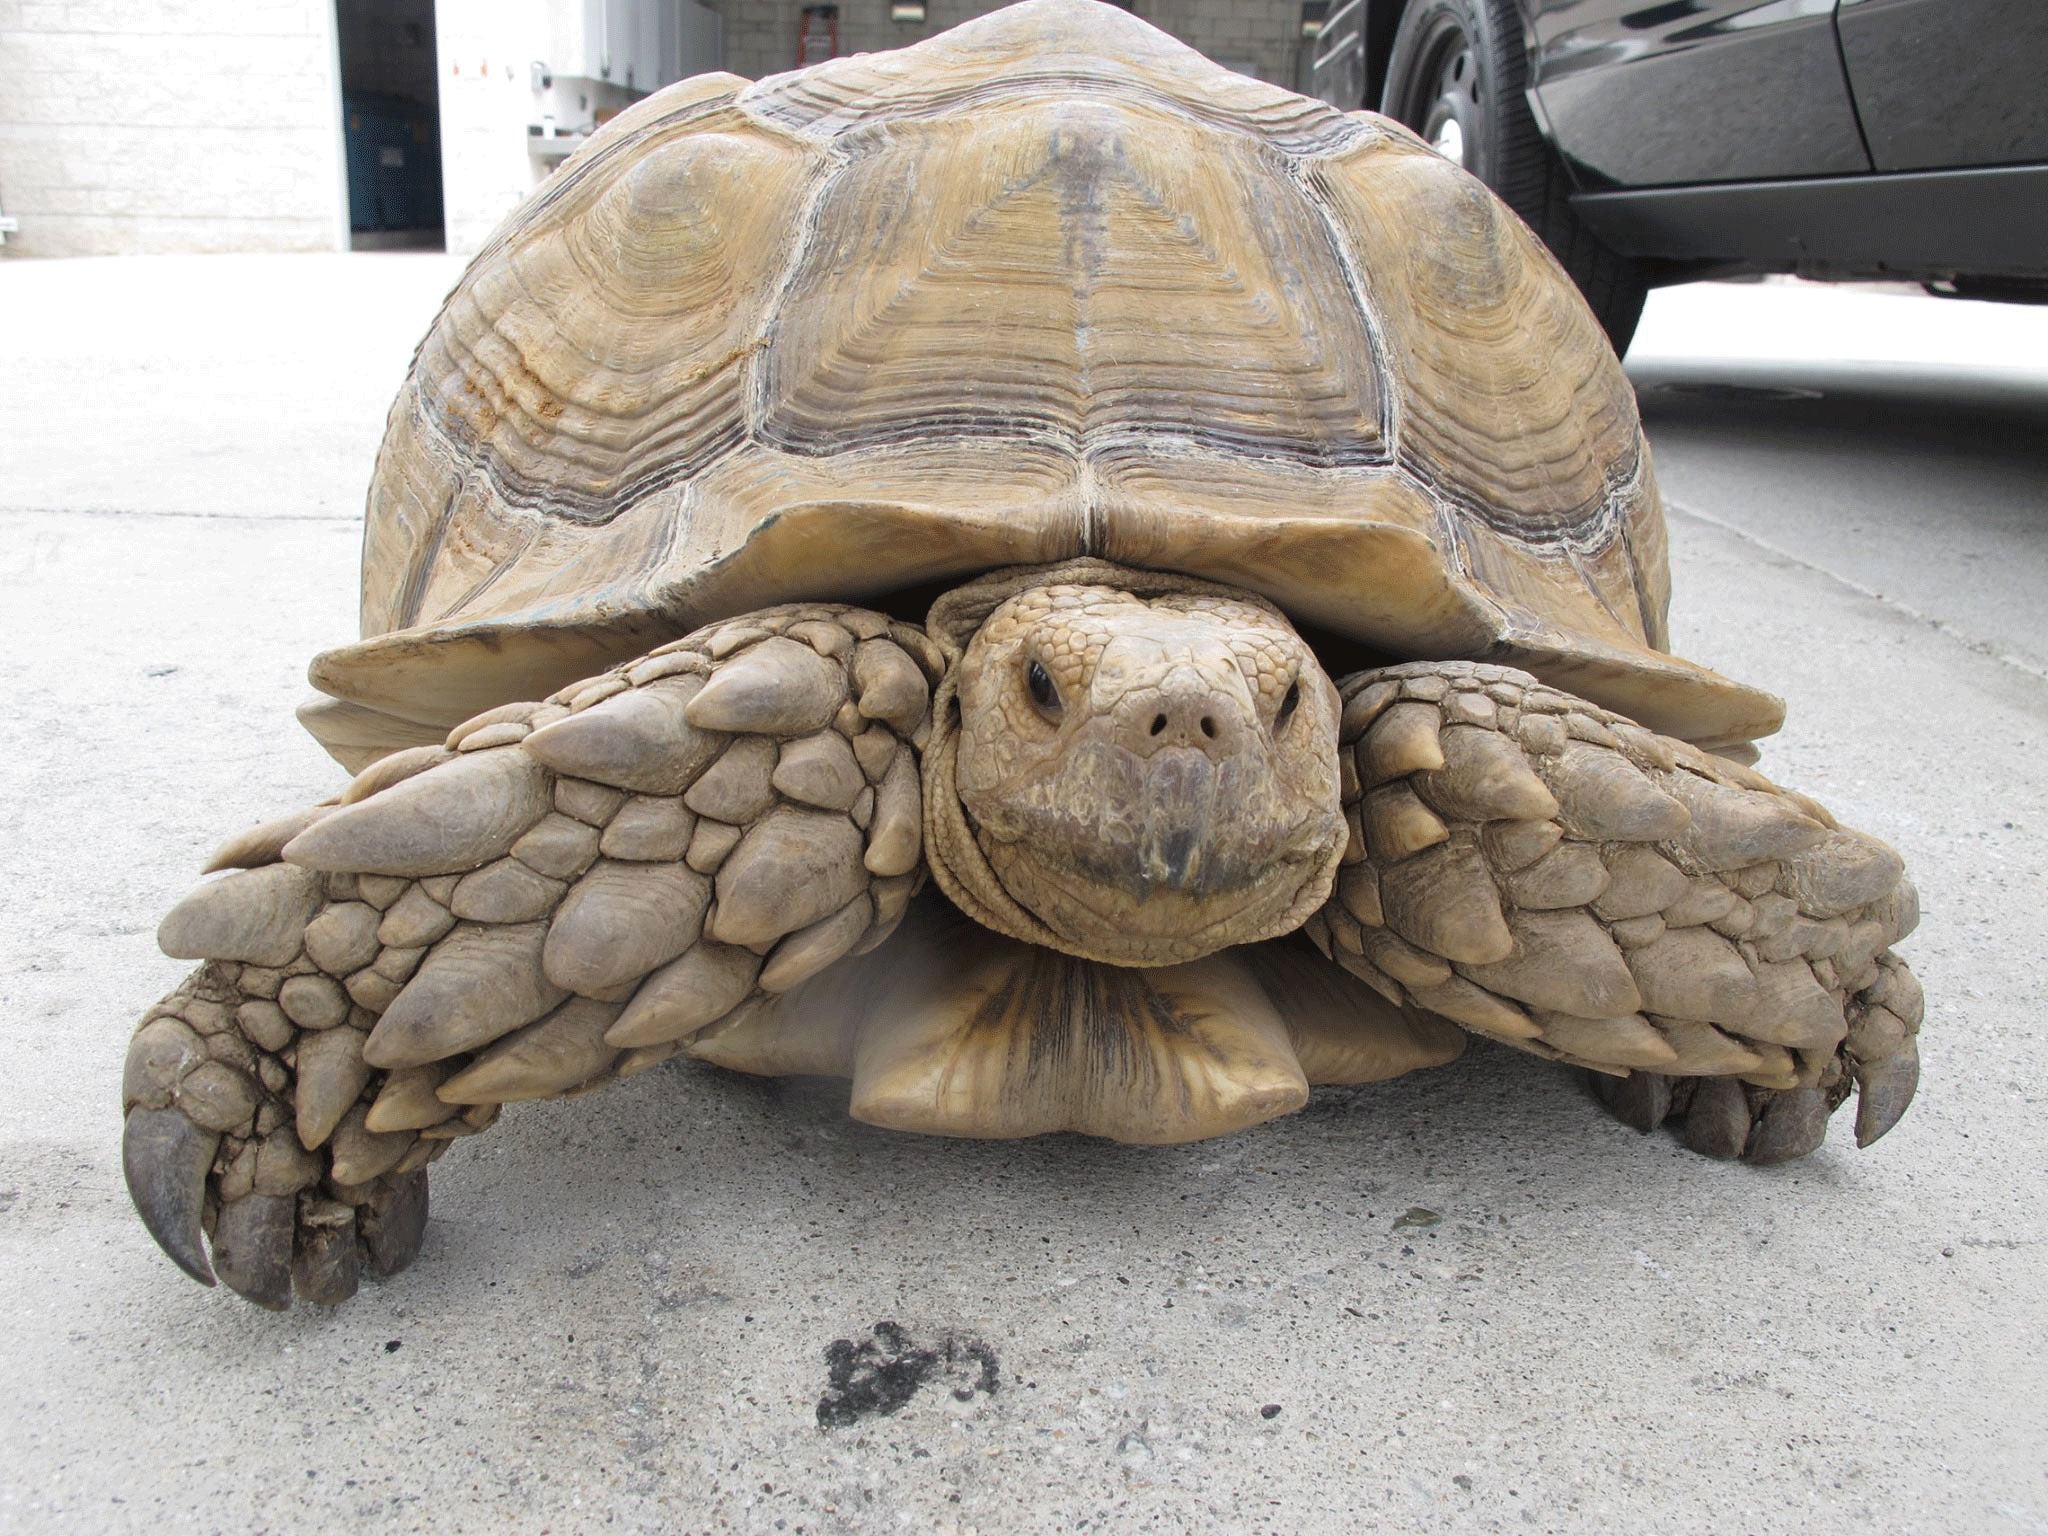 Clark, the 150-pound tortoise found on the run by police